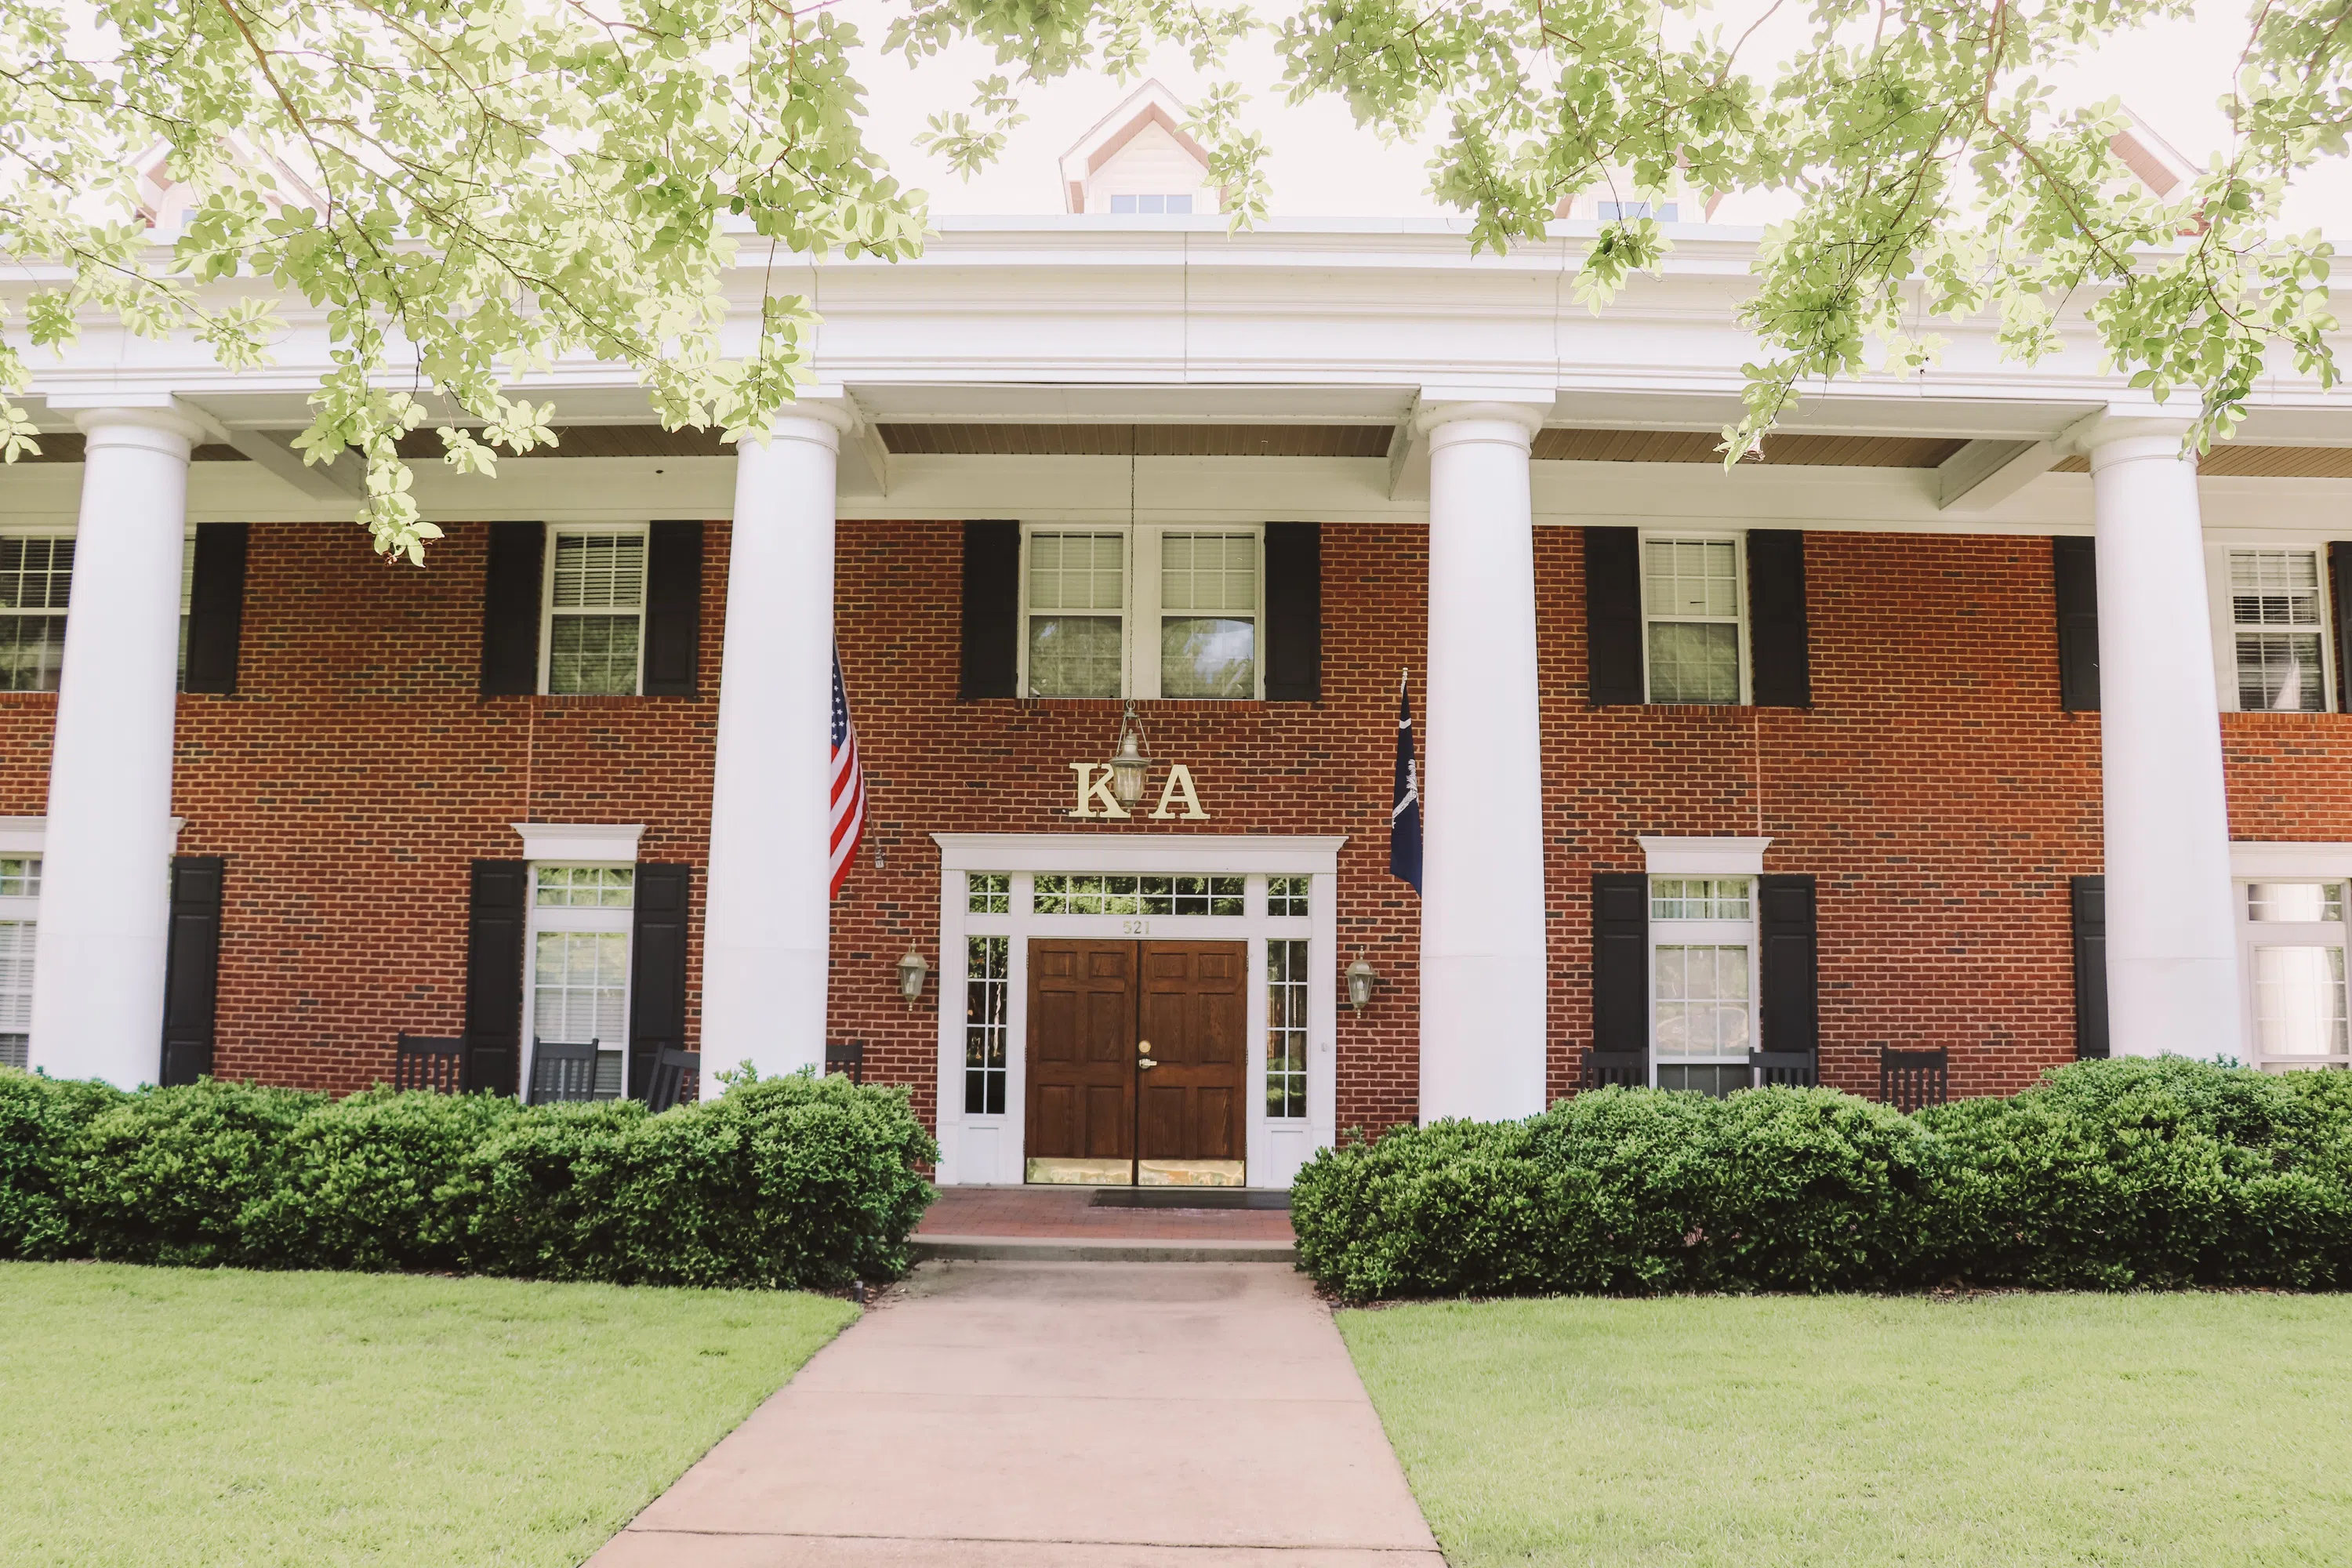 View of the front of the Kappa Alpha House during the day